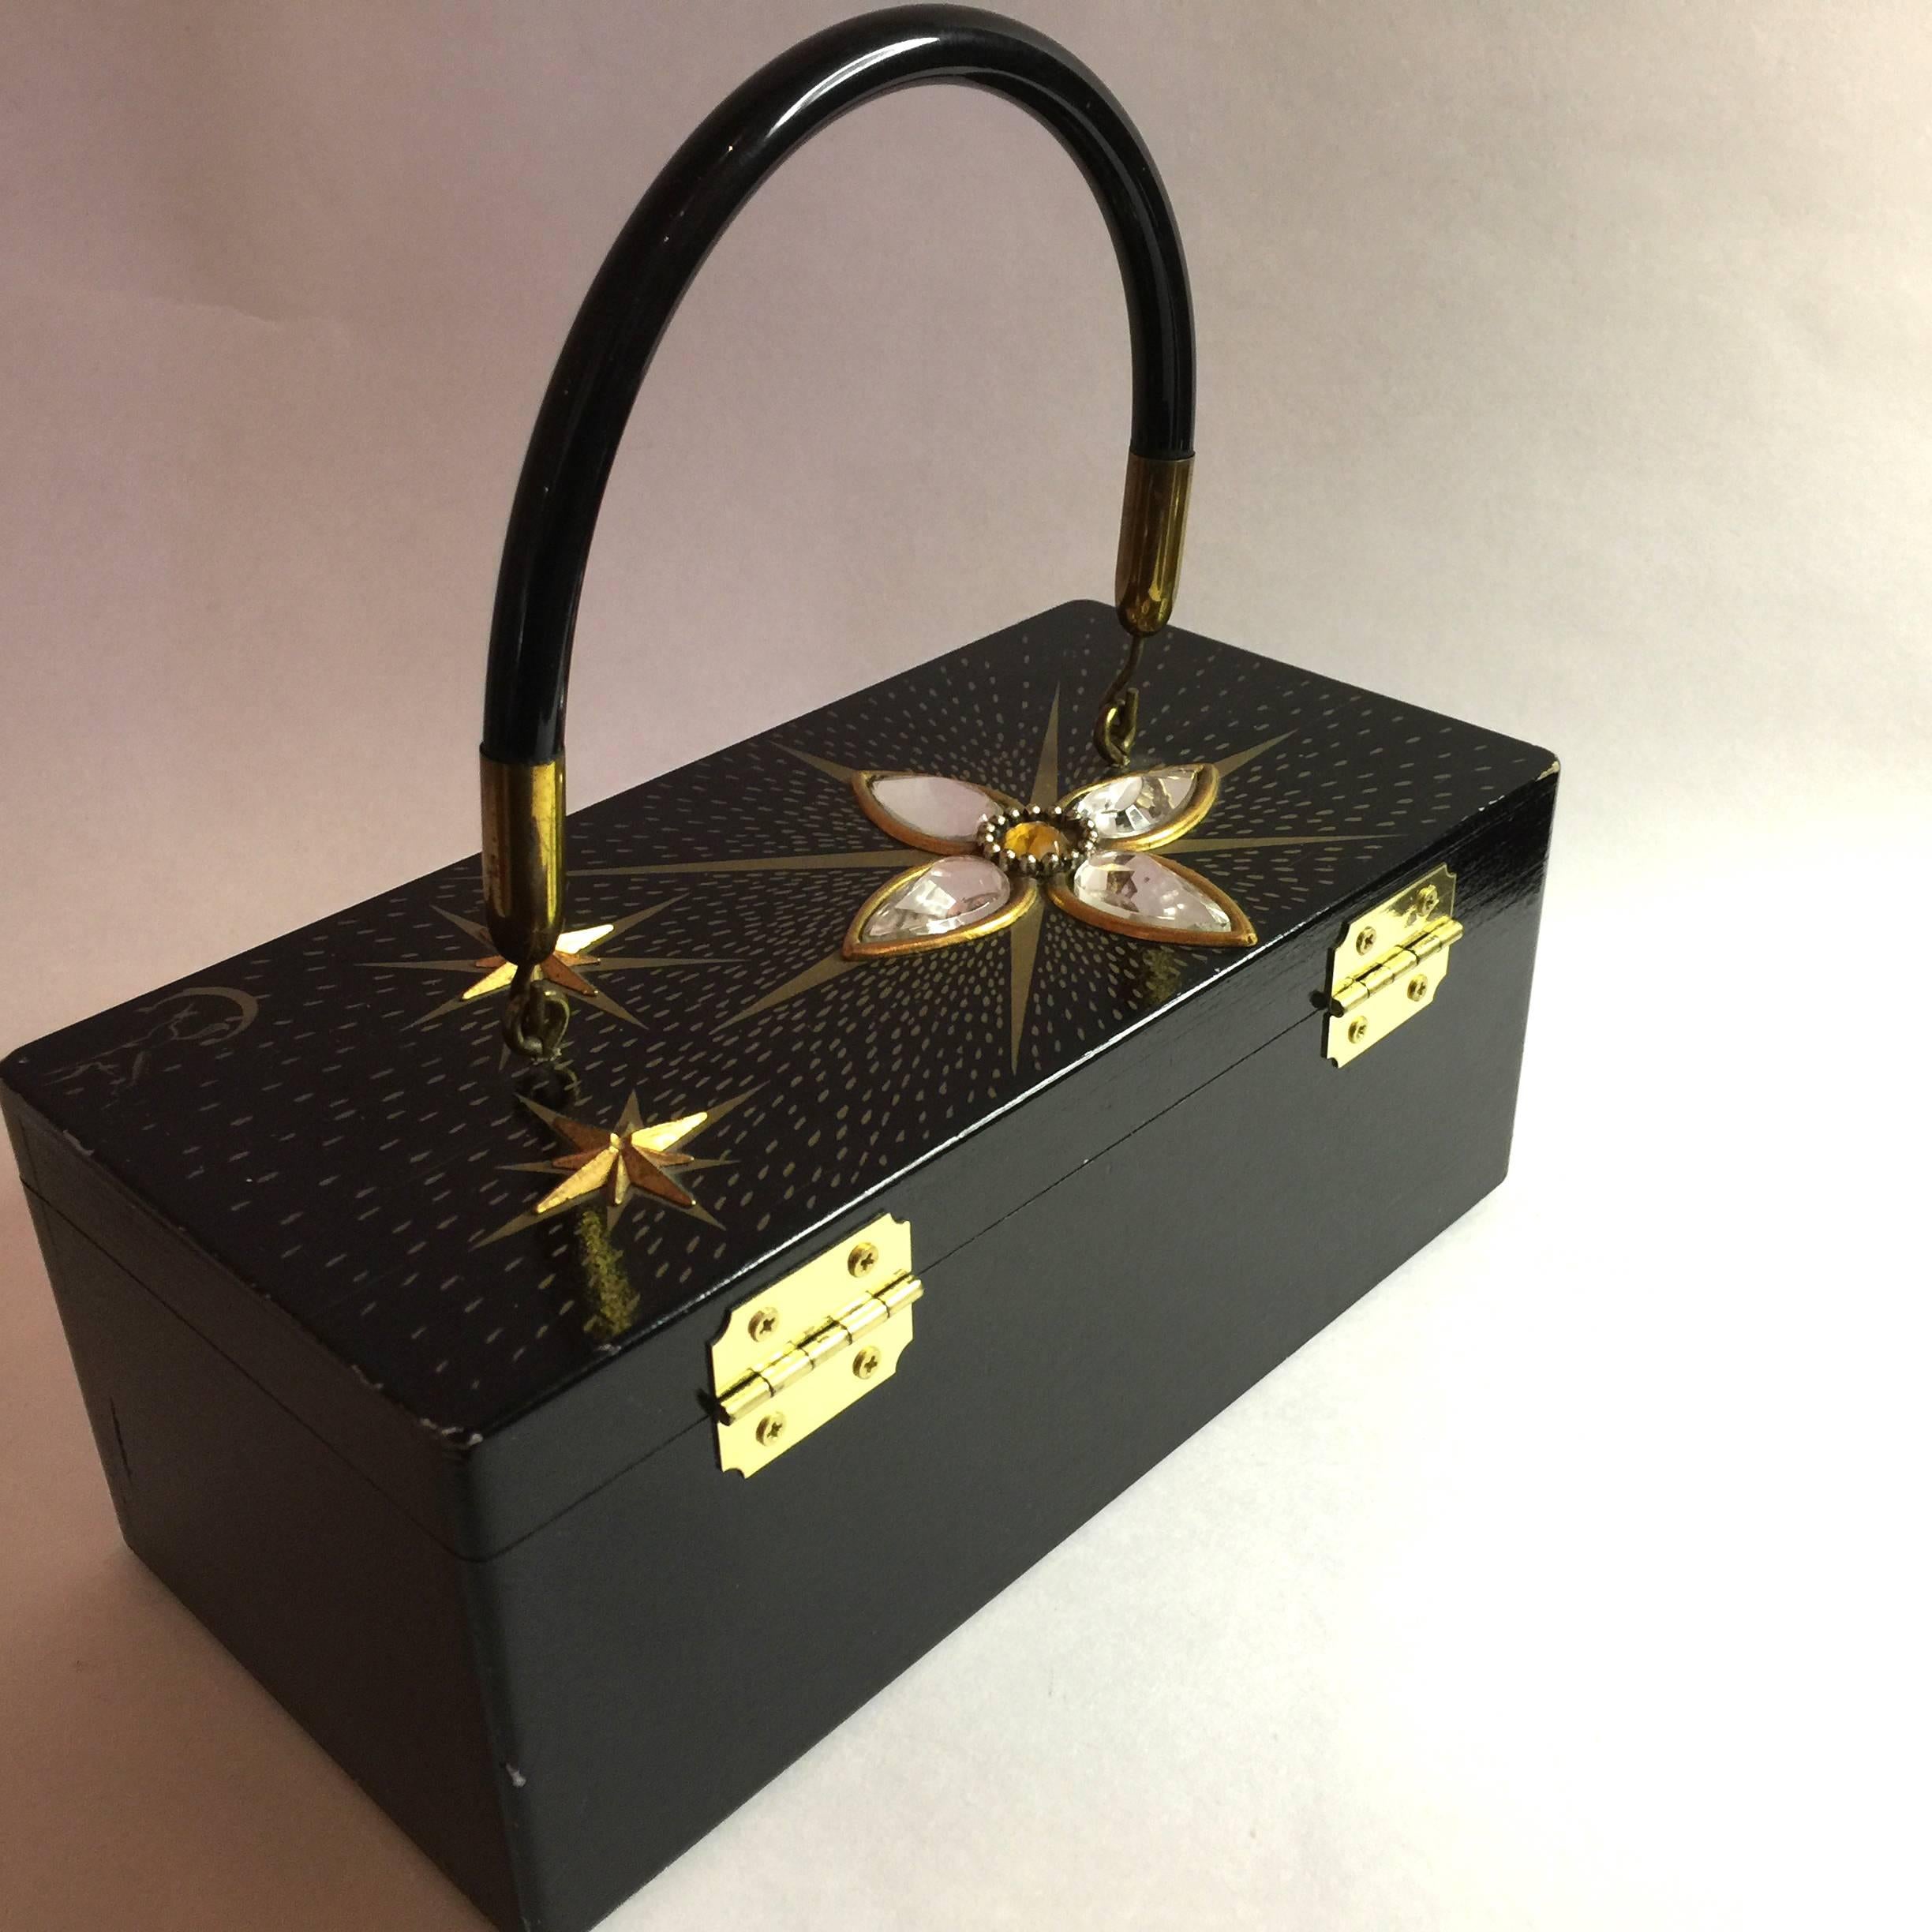 This totally Fabulous 1960s Enid Collins of Texas STAR DUST Black Wooden Box Bag Purse is a rare black evening example of Collins work, and is among her most sought after handmade designs. Part of the hardbody plastic and wooden box bag craze of the